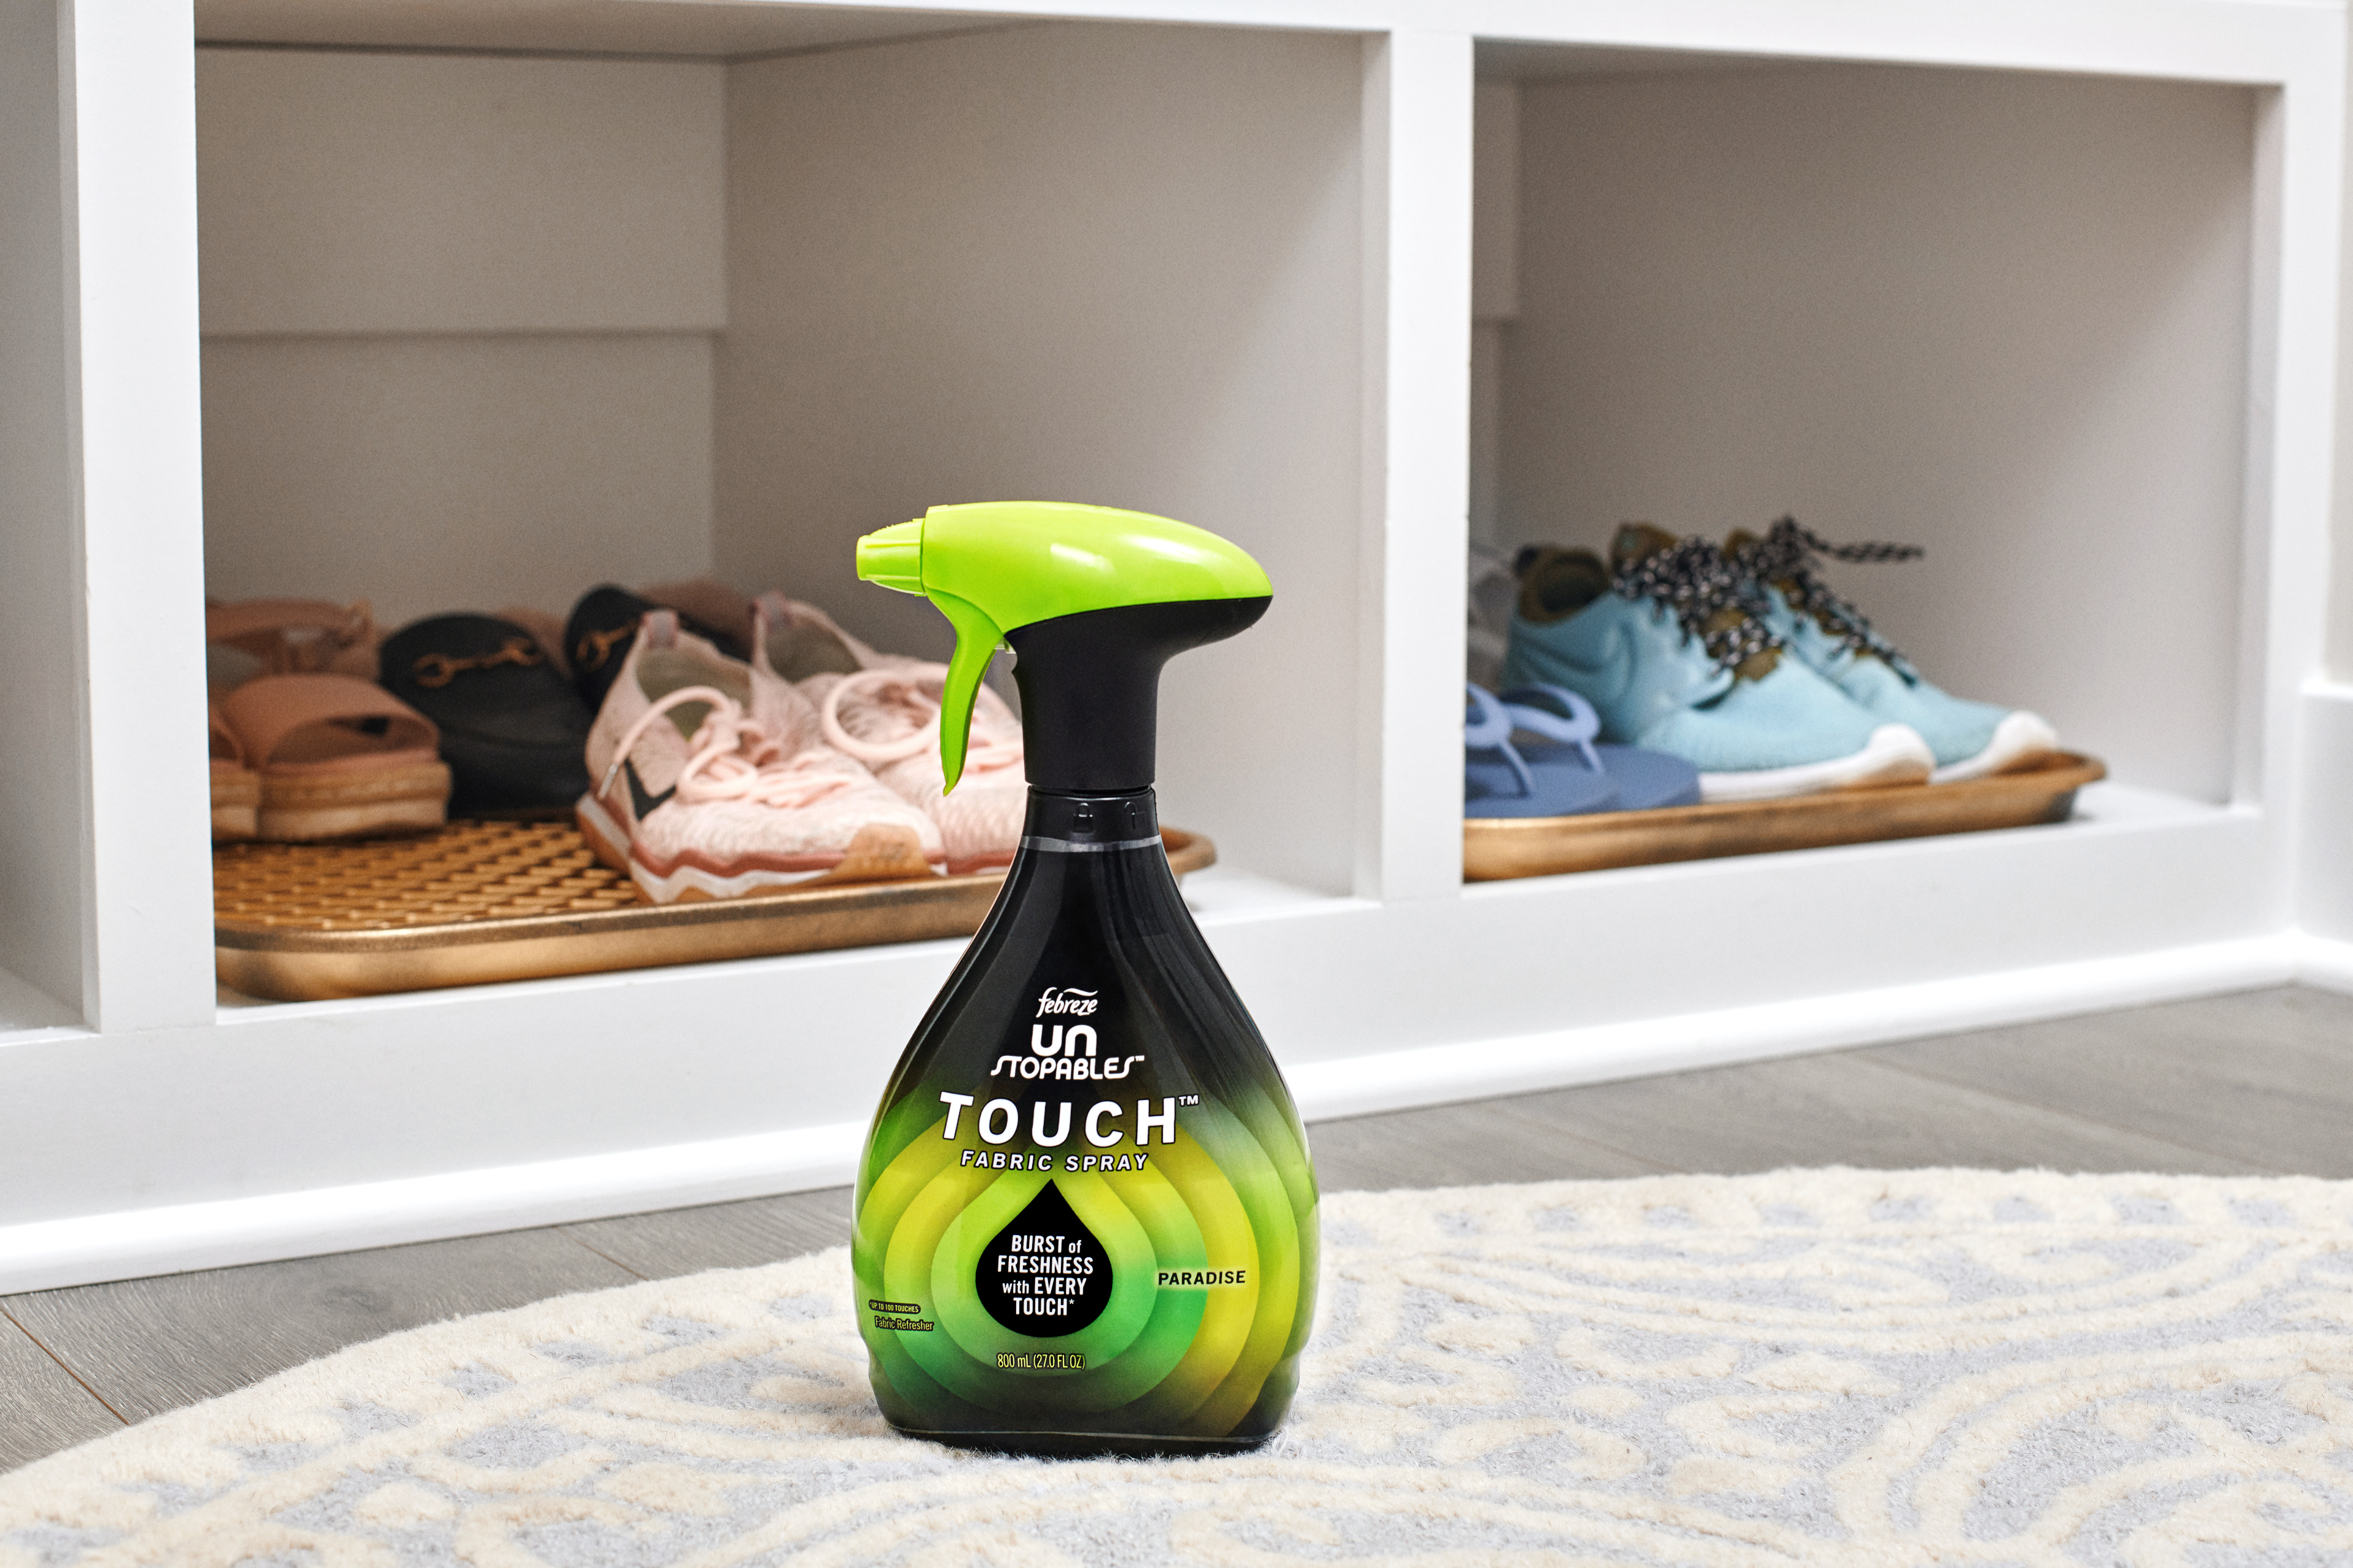  Febreeze bottle on floor by sneakers for Real Simple by Alison Gootee Photography